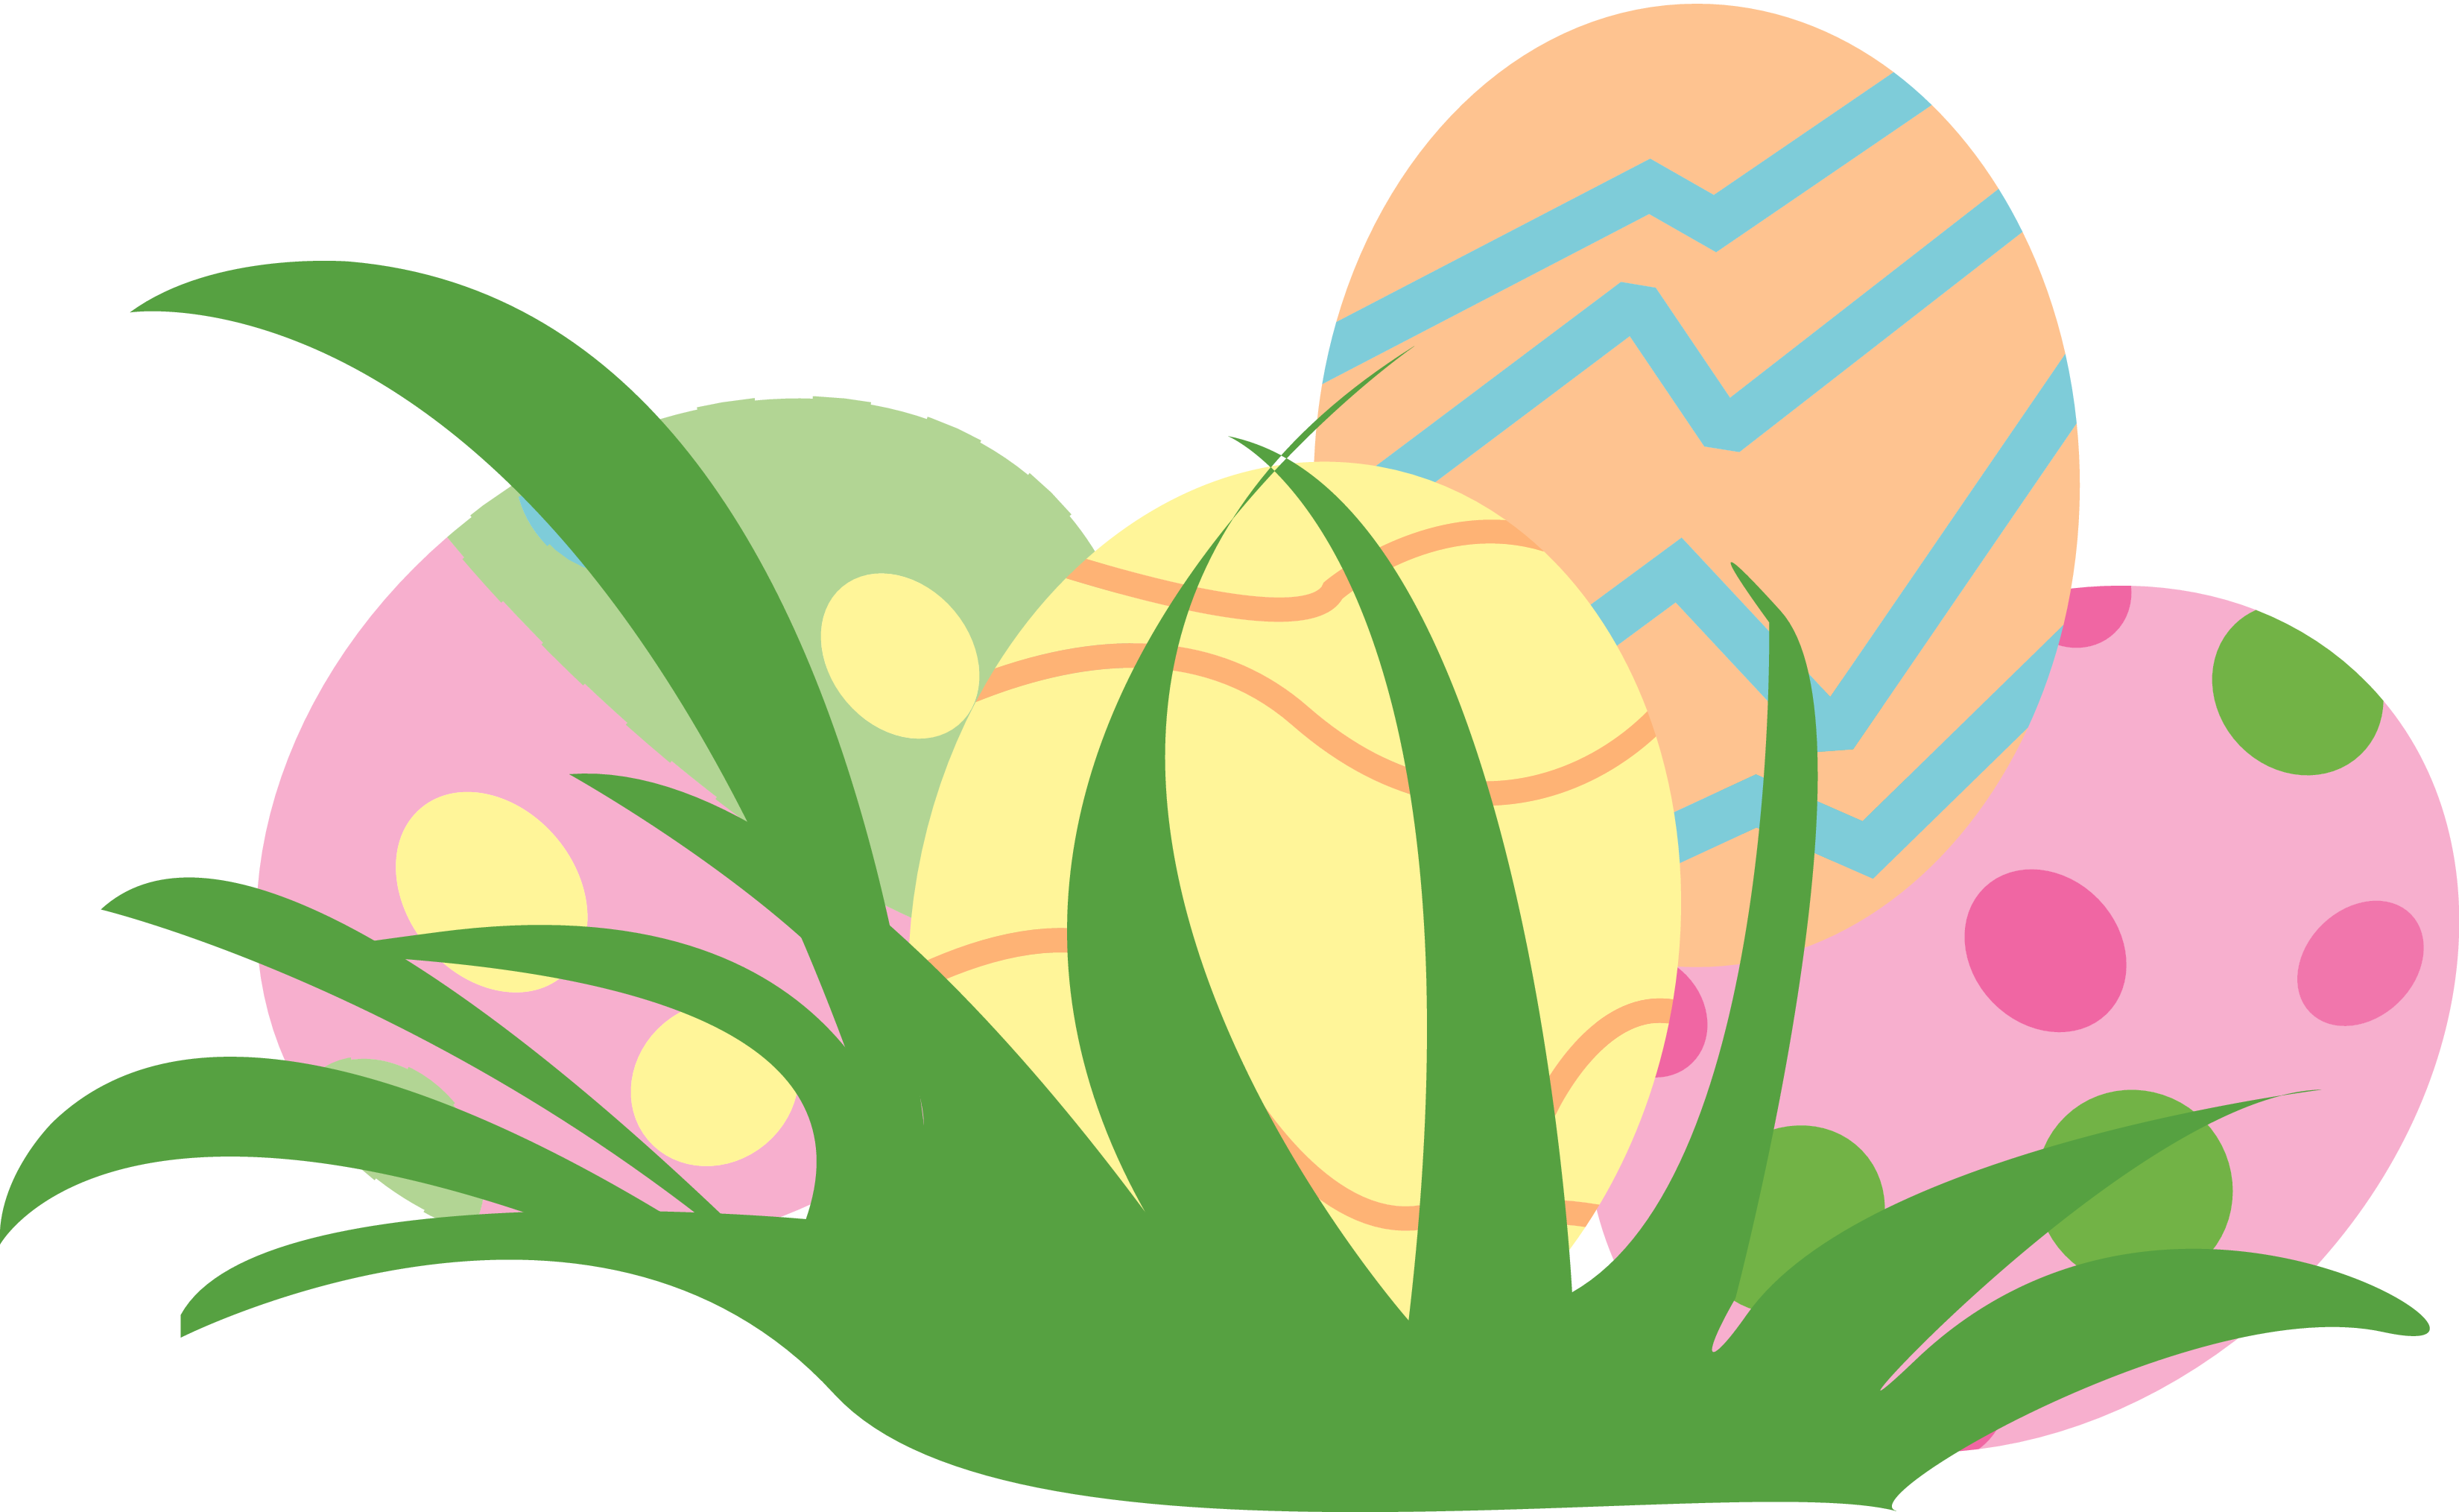 Free Easter Egg Clipart, Download Free Clip Art, Free Clip.